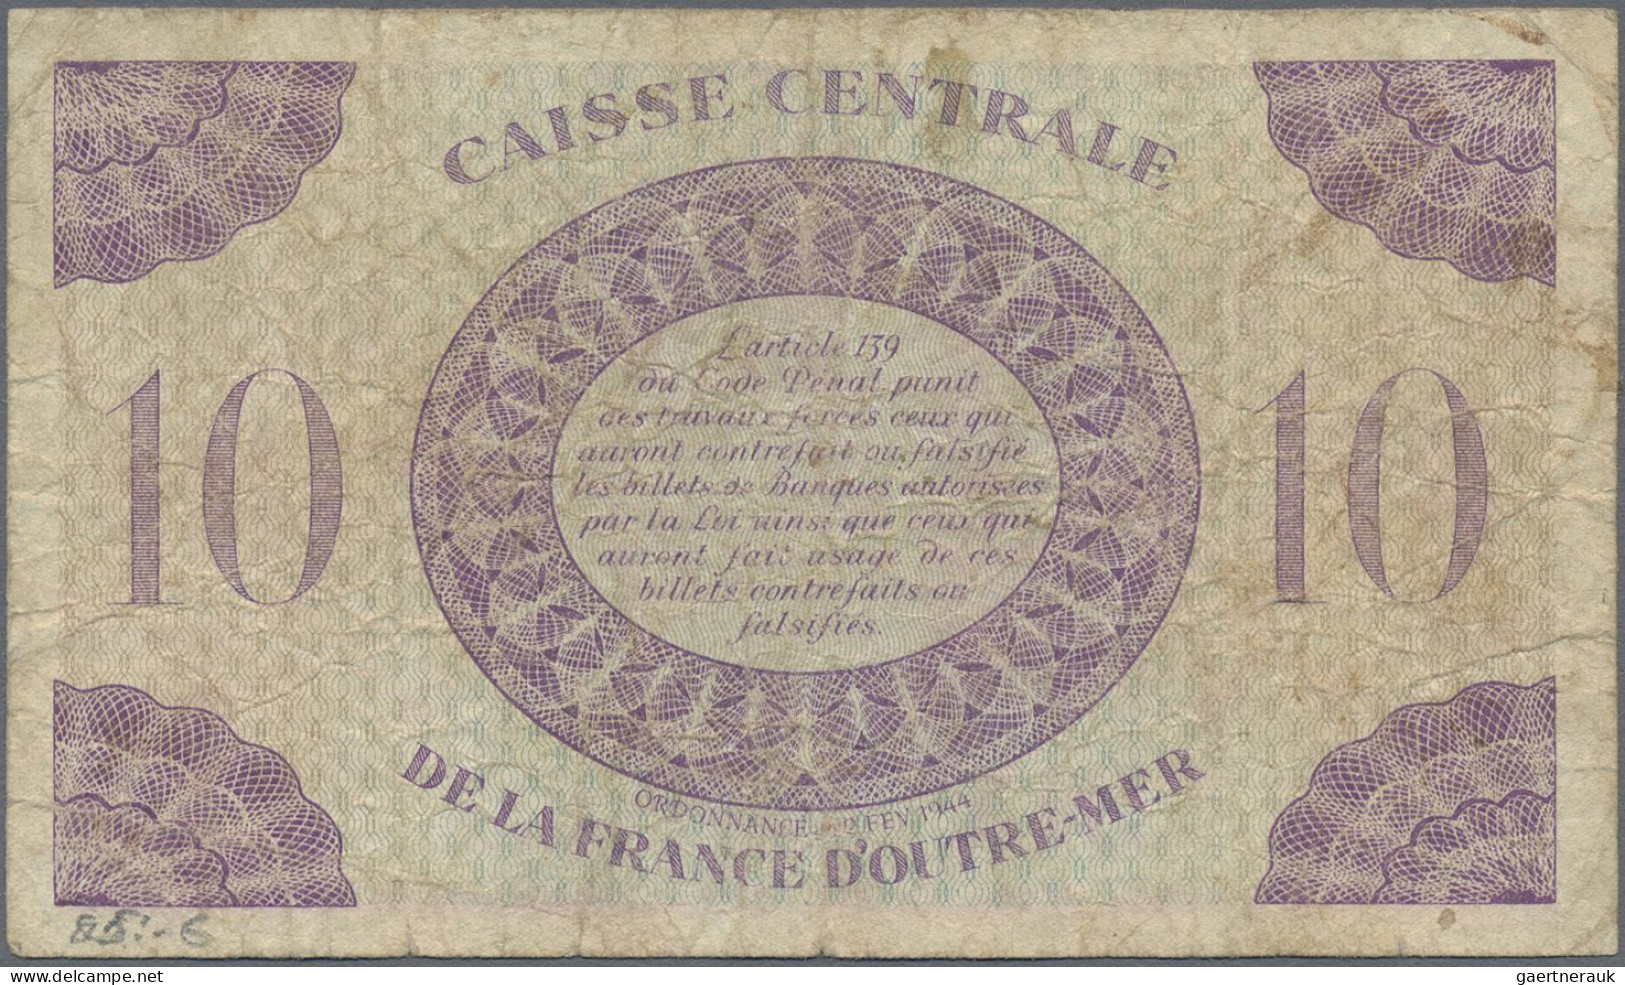 Guadeloupe: Caisse Centrale De La France D'Outre-Mer – GUADELOUPE, Pair With 10 - Other - America